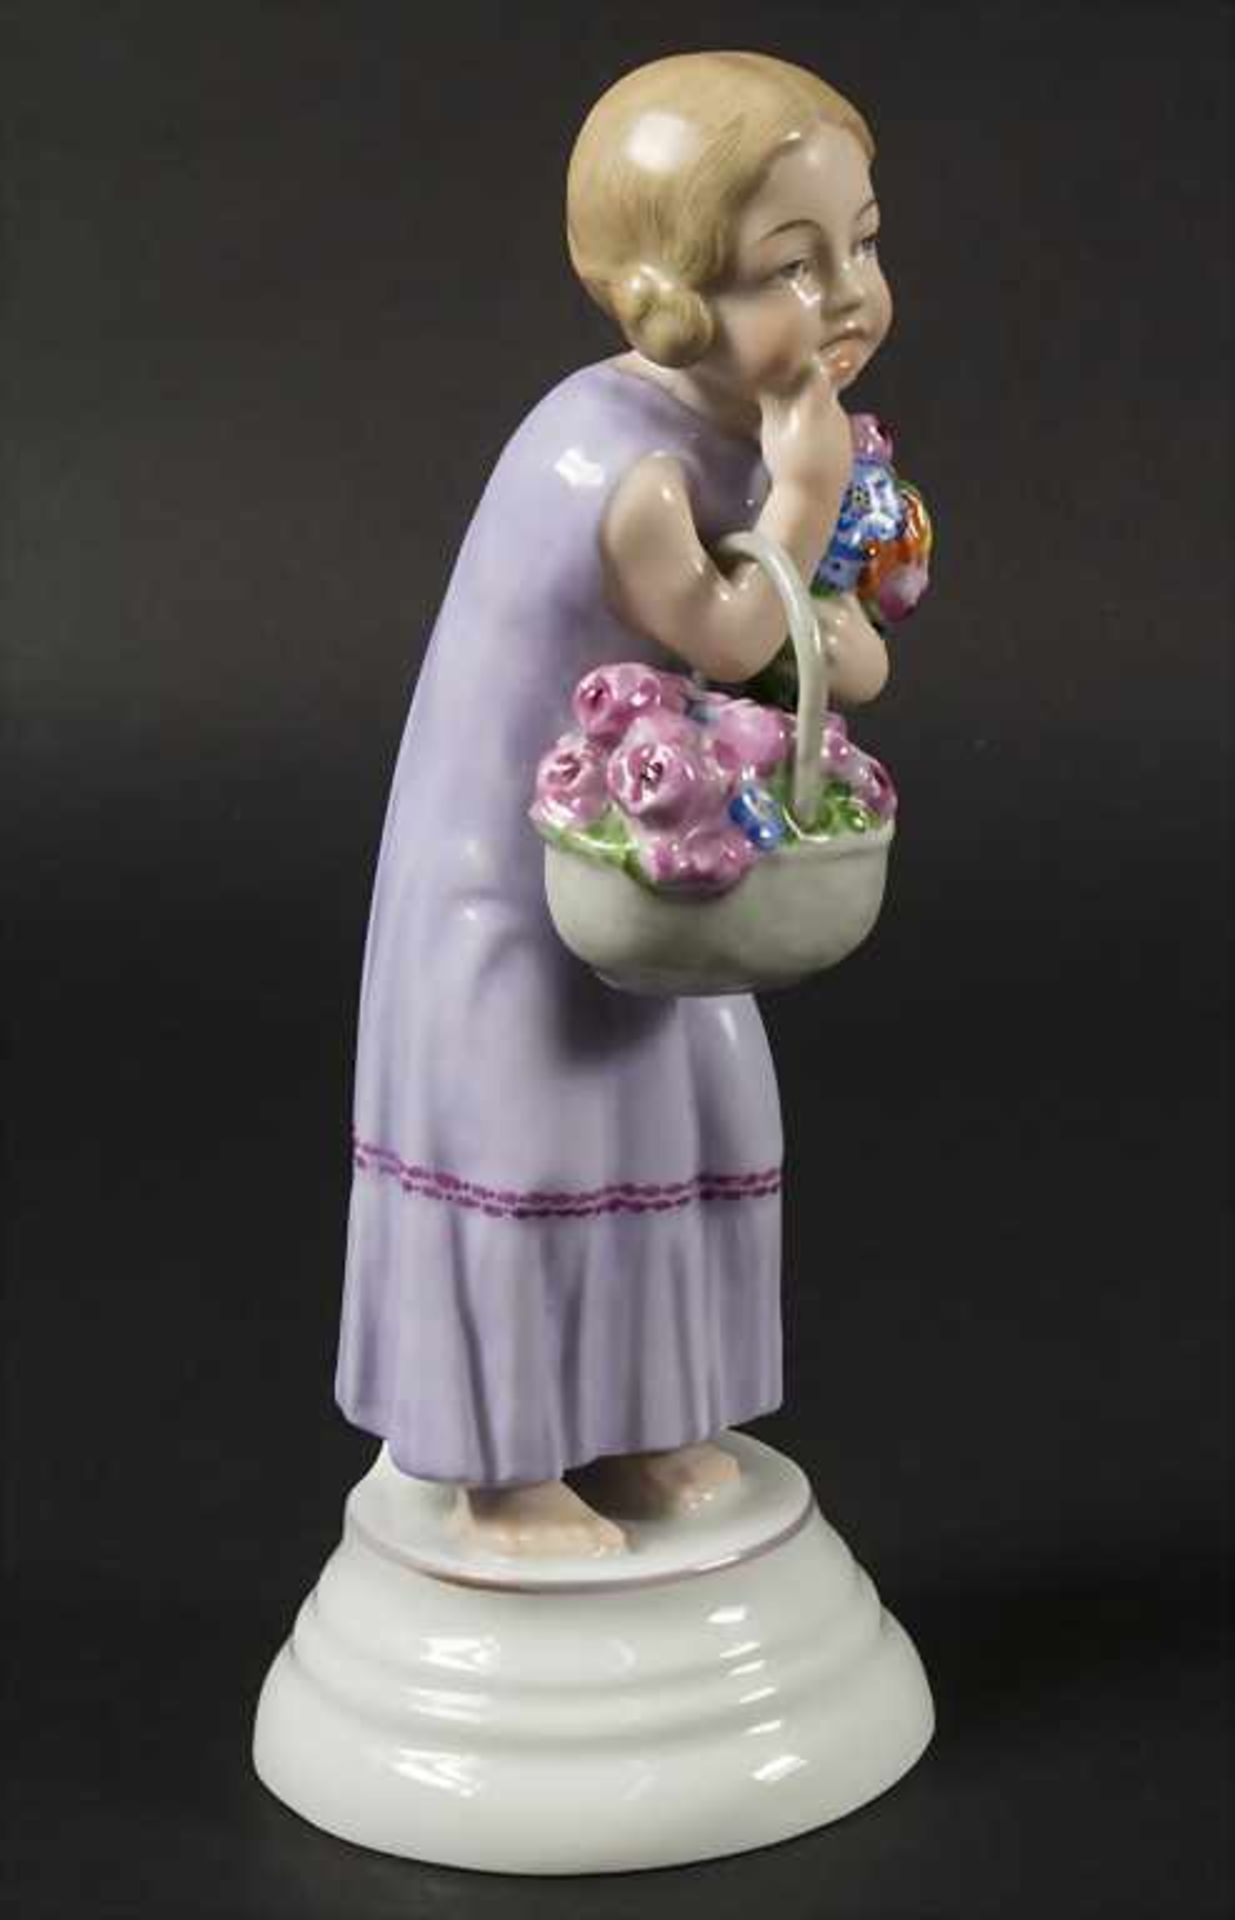 Seltene Figur eines Mädchens mit Blumenkorb / A rare figure of a girl with flowers, Rosenthal, Selb, - Image 3 of 6